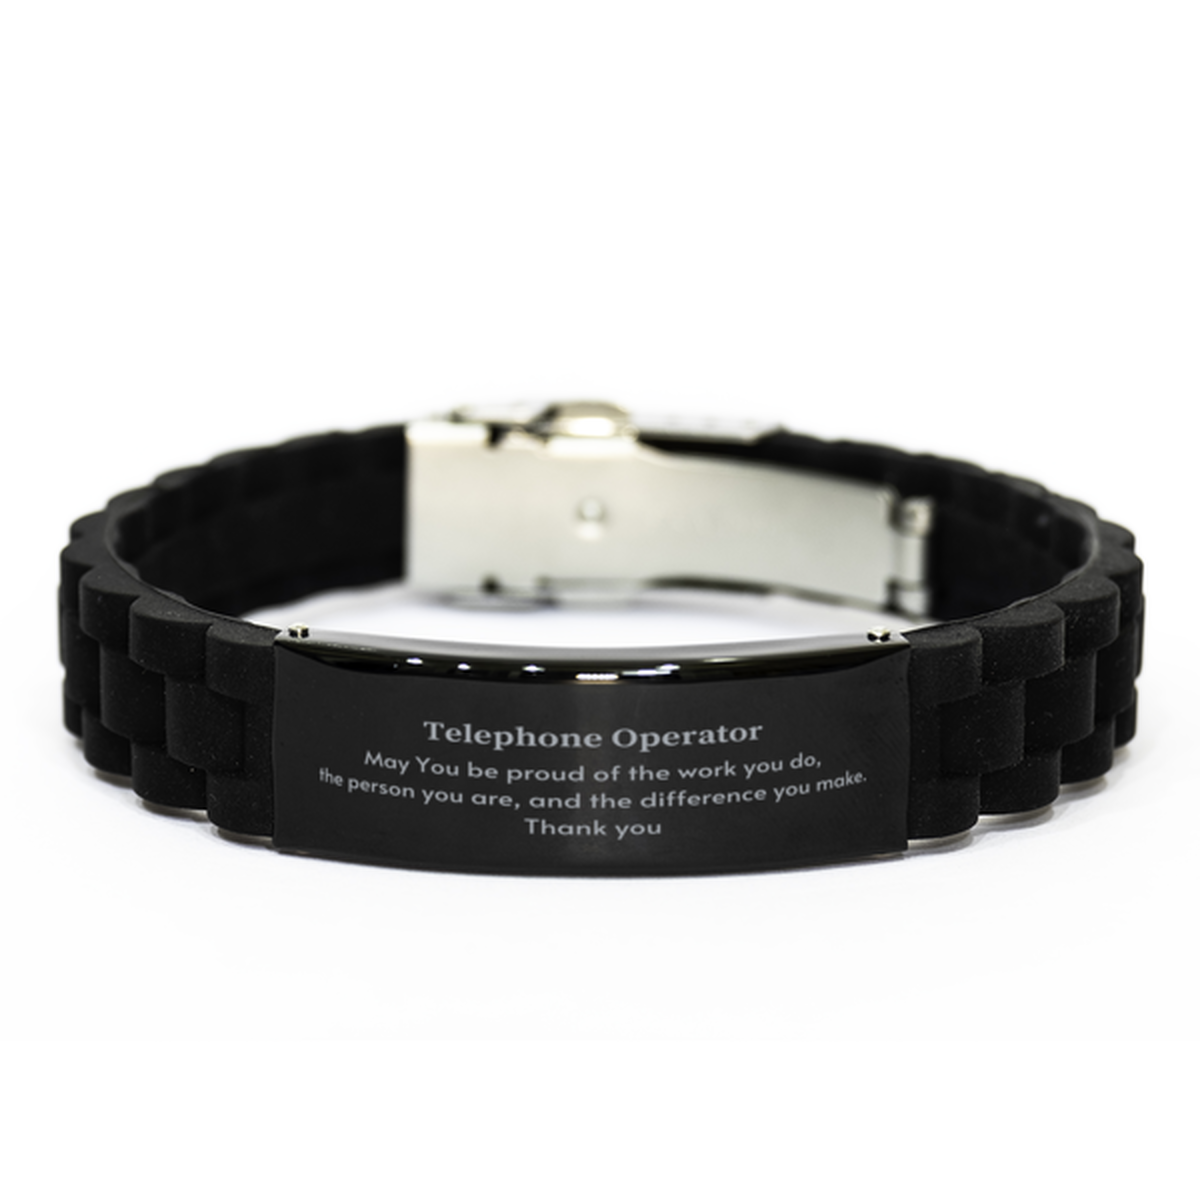 Heartwarming Black Glidelock Clasp Bracelet Retirement Coworkers Gifts for Telephone Operator, Telephone Operator May You be proud of the work you do, the person you are Gifts for Boss Men Women Friends